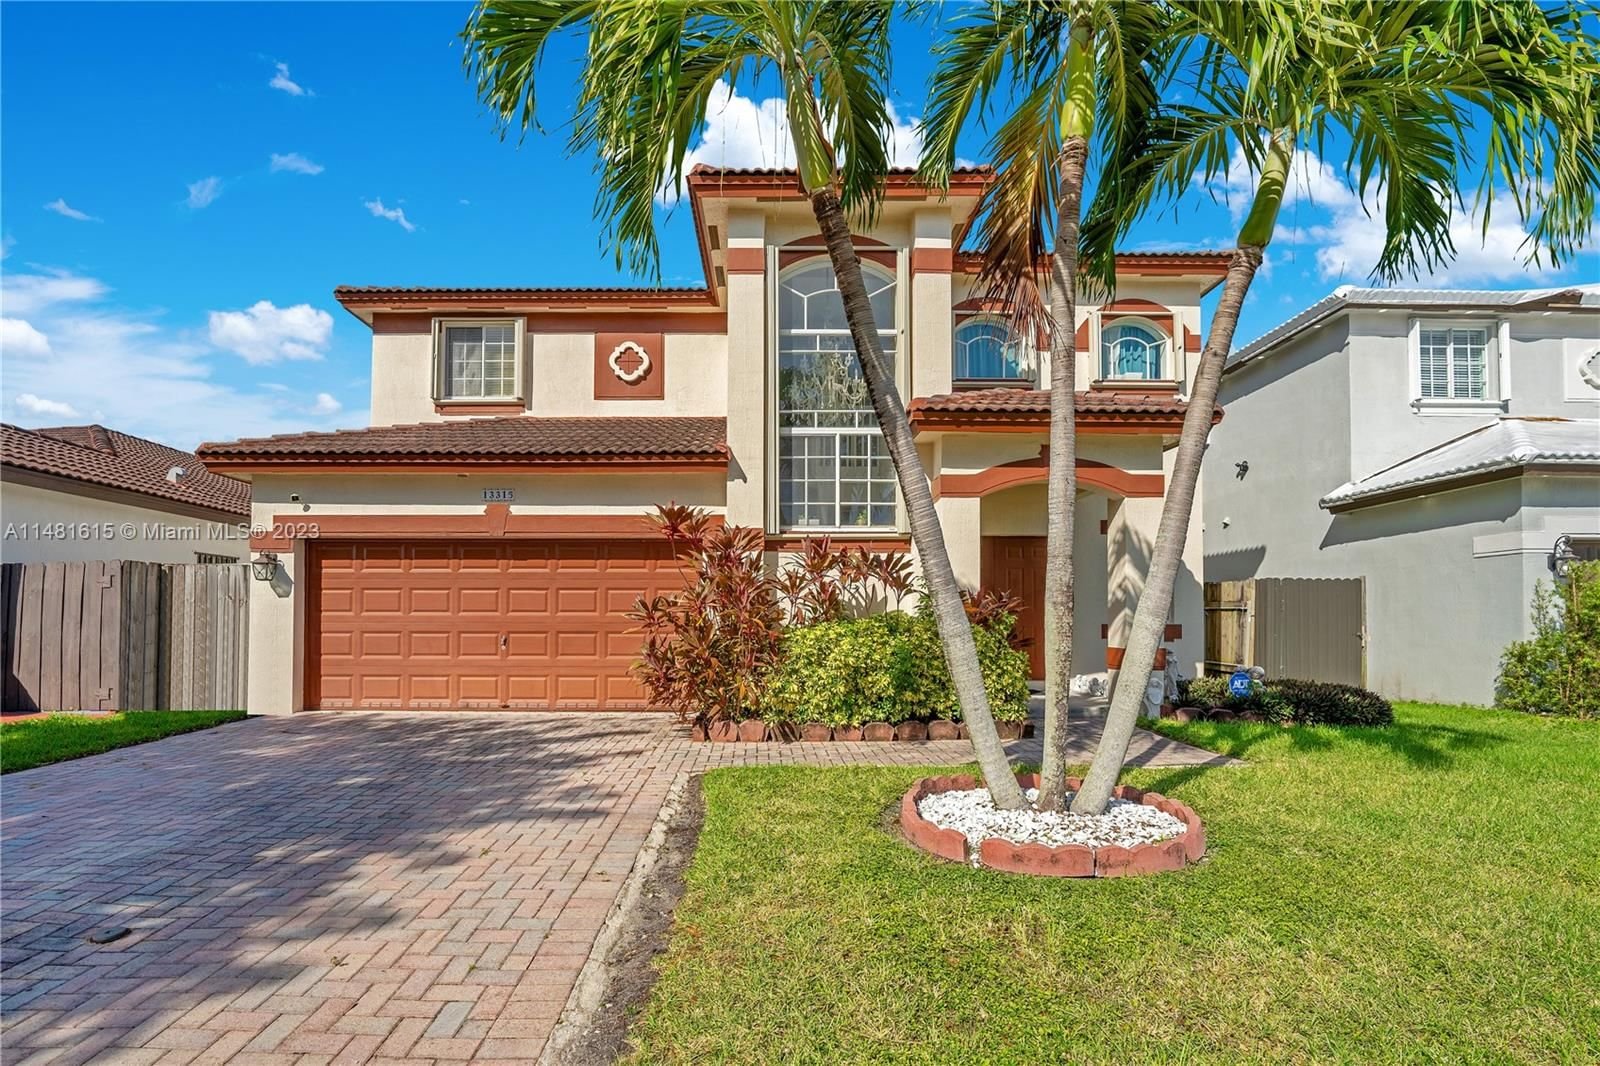 Real estate property located at 13315 282nd St, Miami-Dade County, CHATEAU ROYAL ESTATES, Homestead, FL